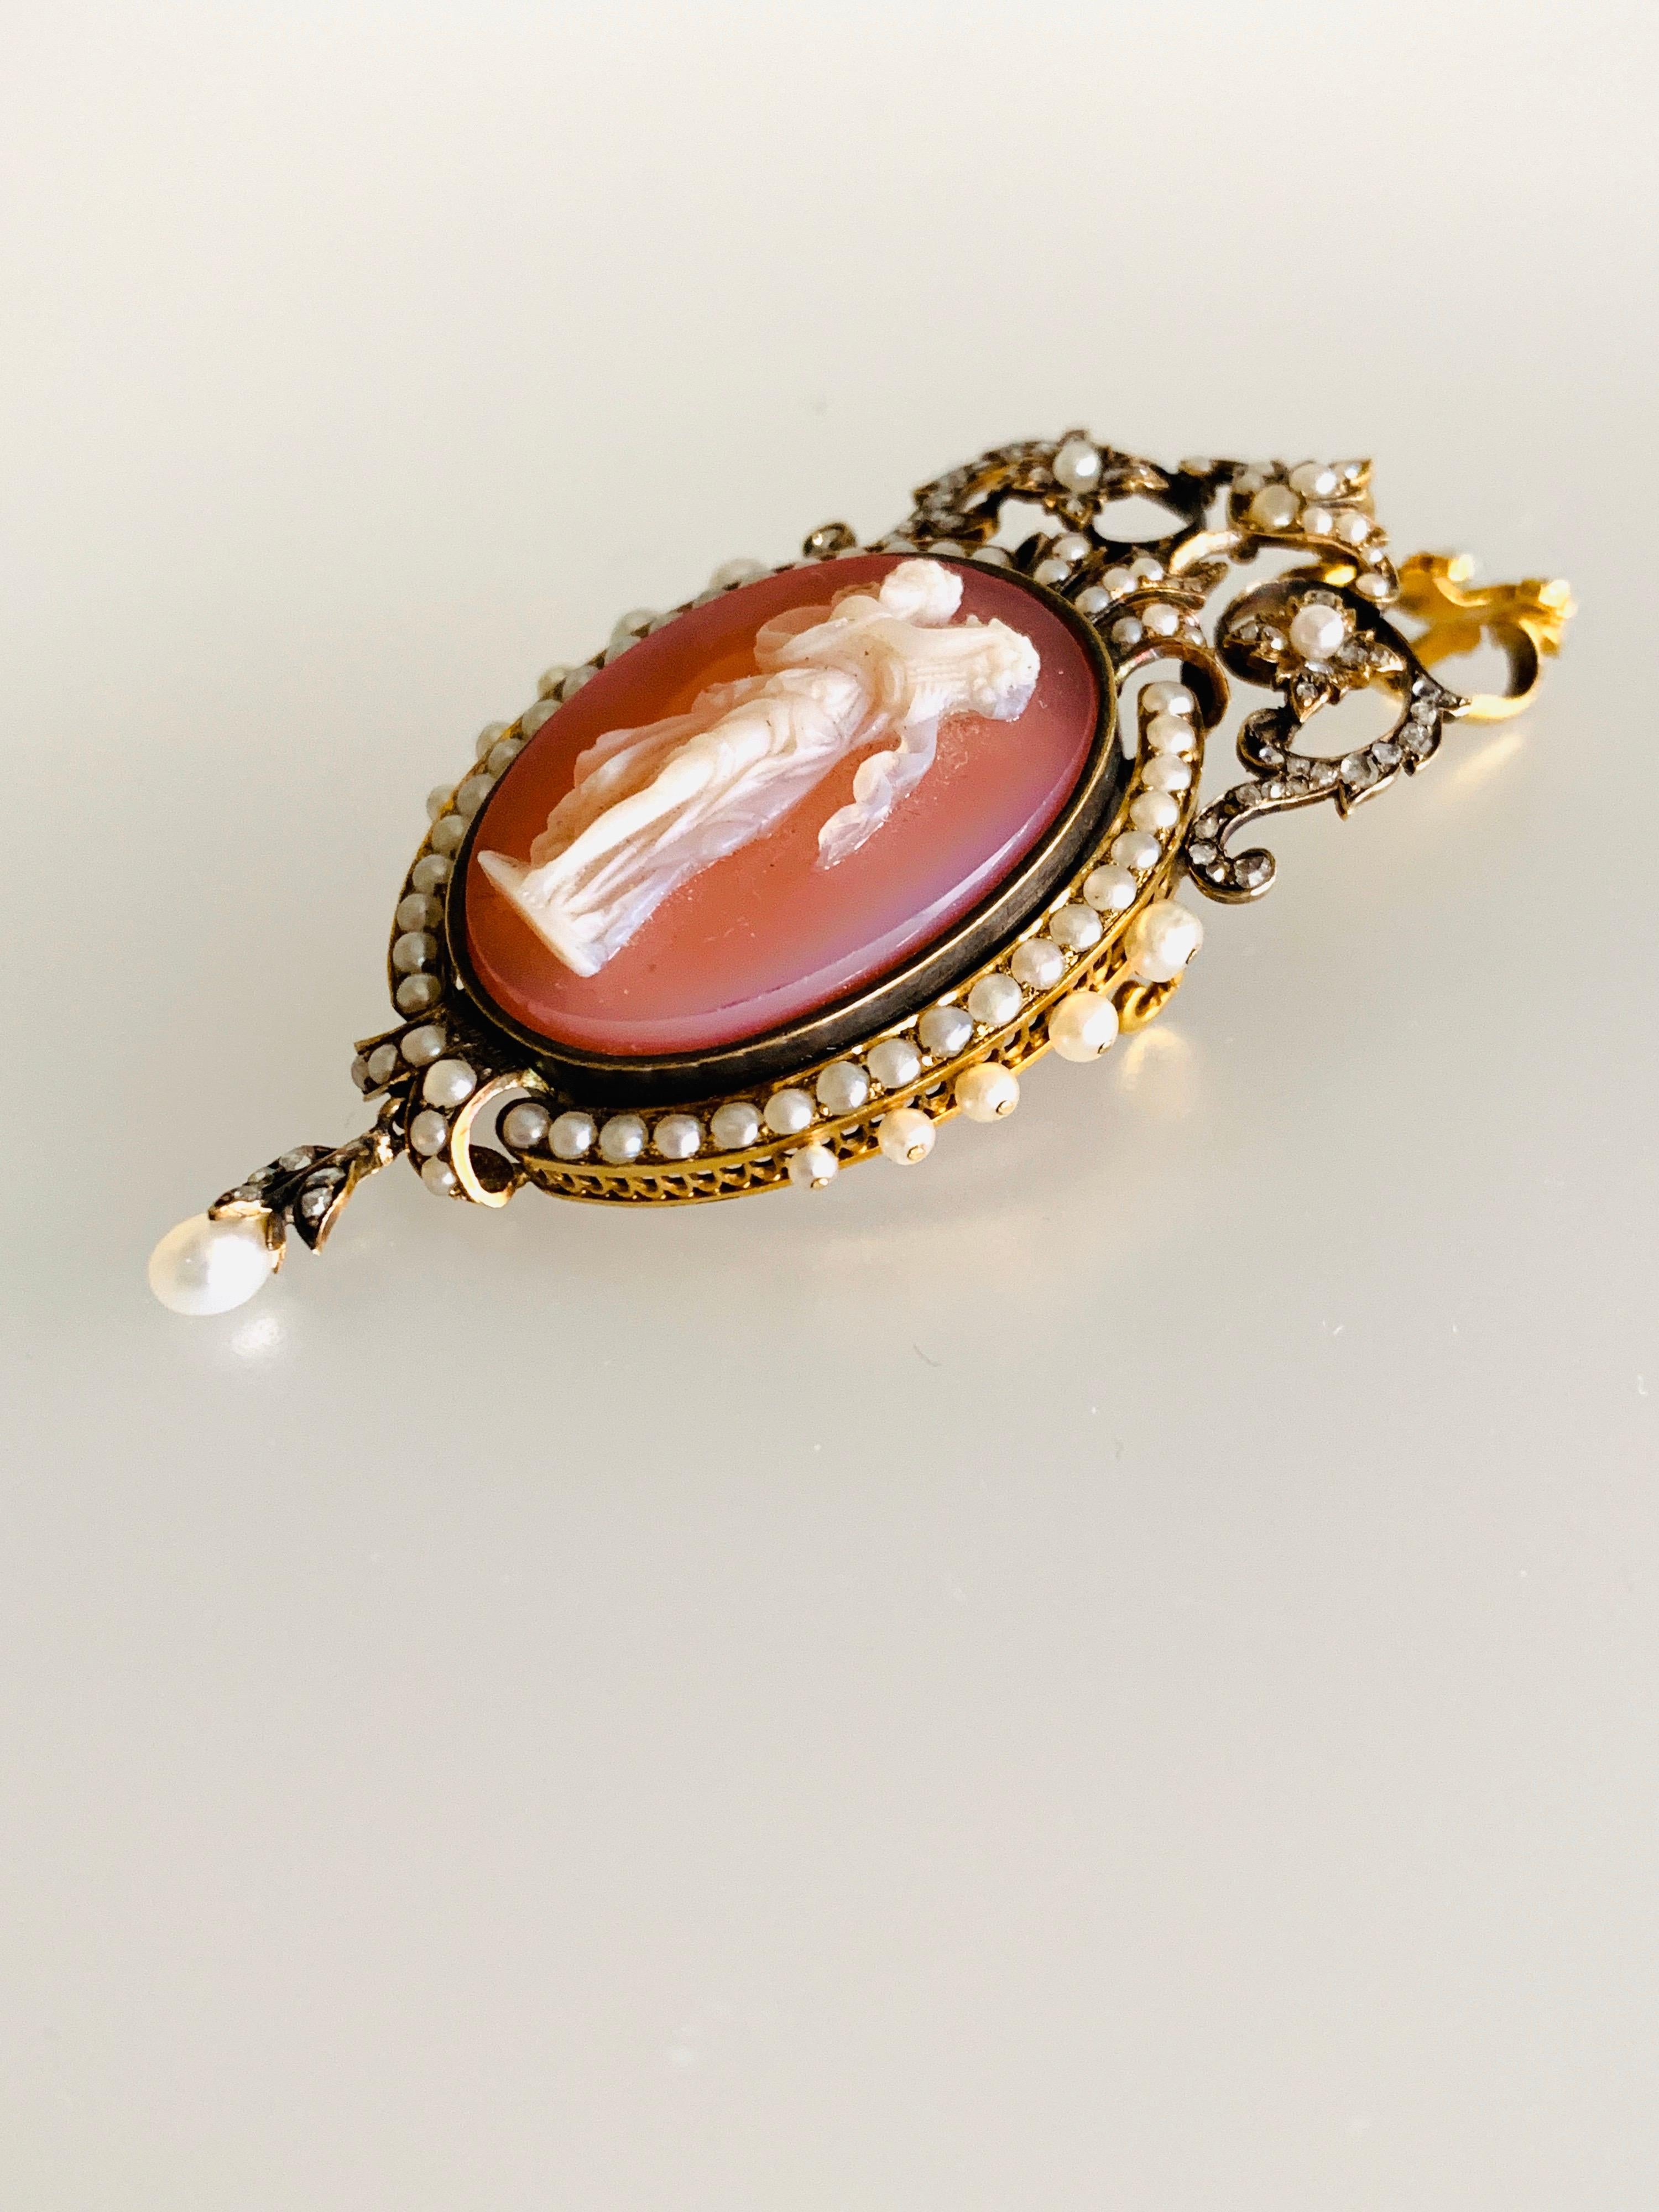 Gemolithos, Victorian, hardstone cameo, pearl and rose´-cut diamond pendant-brooch. 
Circa 1880s. Measurements 85x37mm, weight: 27,3gr. 